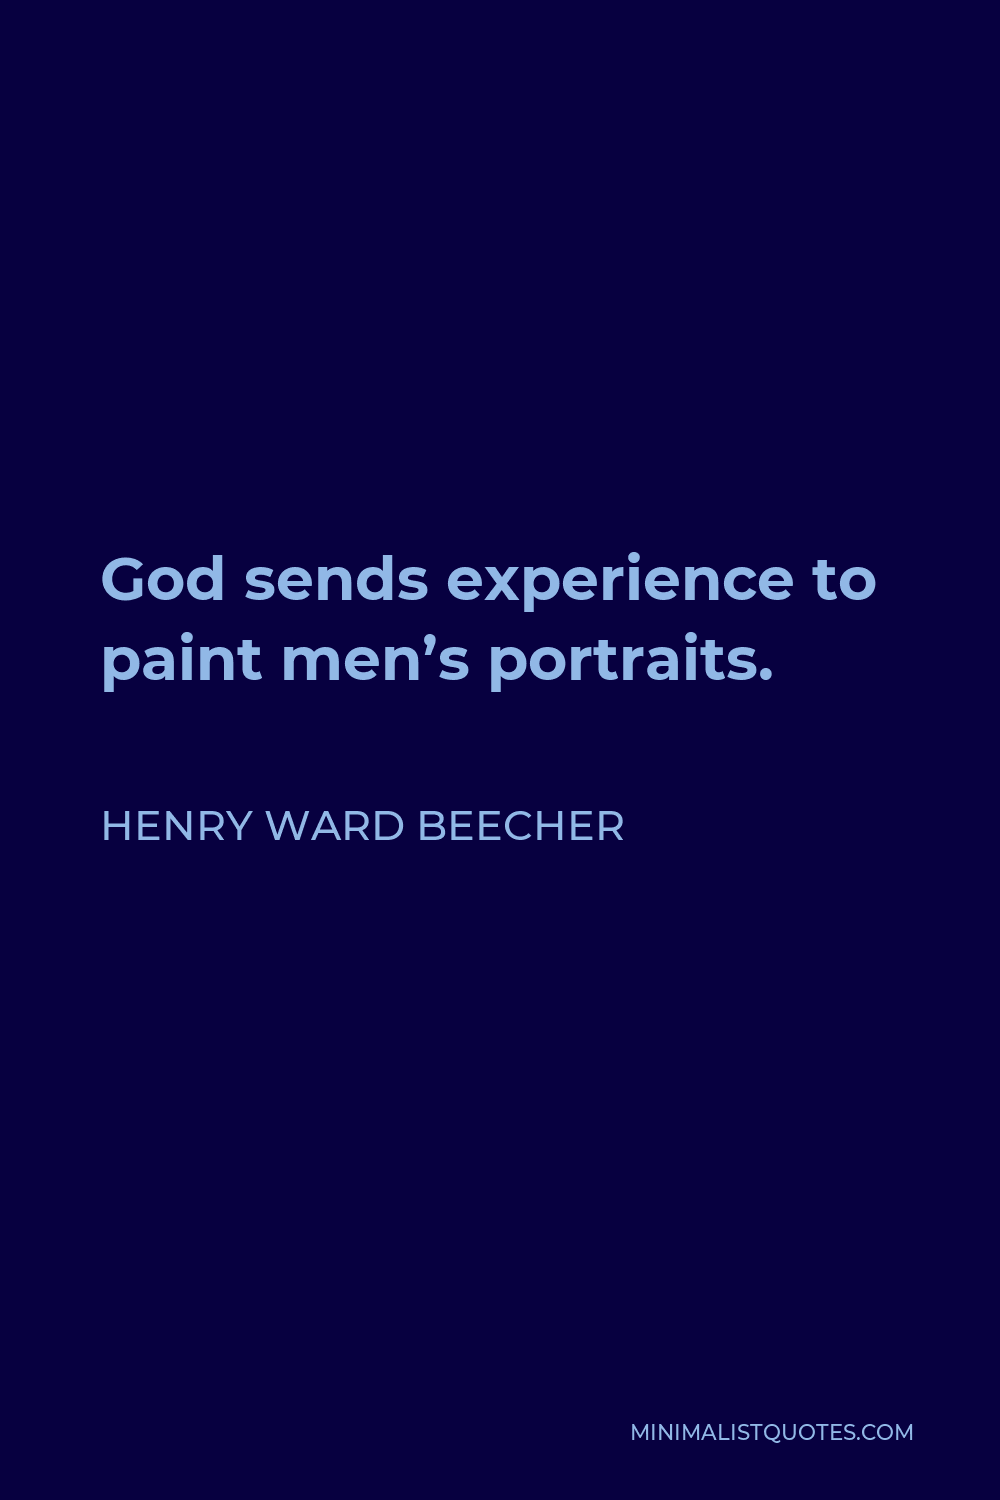 Henry Ward Beecher Quote - God sends experience to paint men’s portraits.